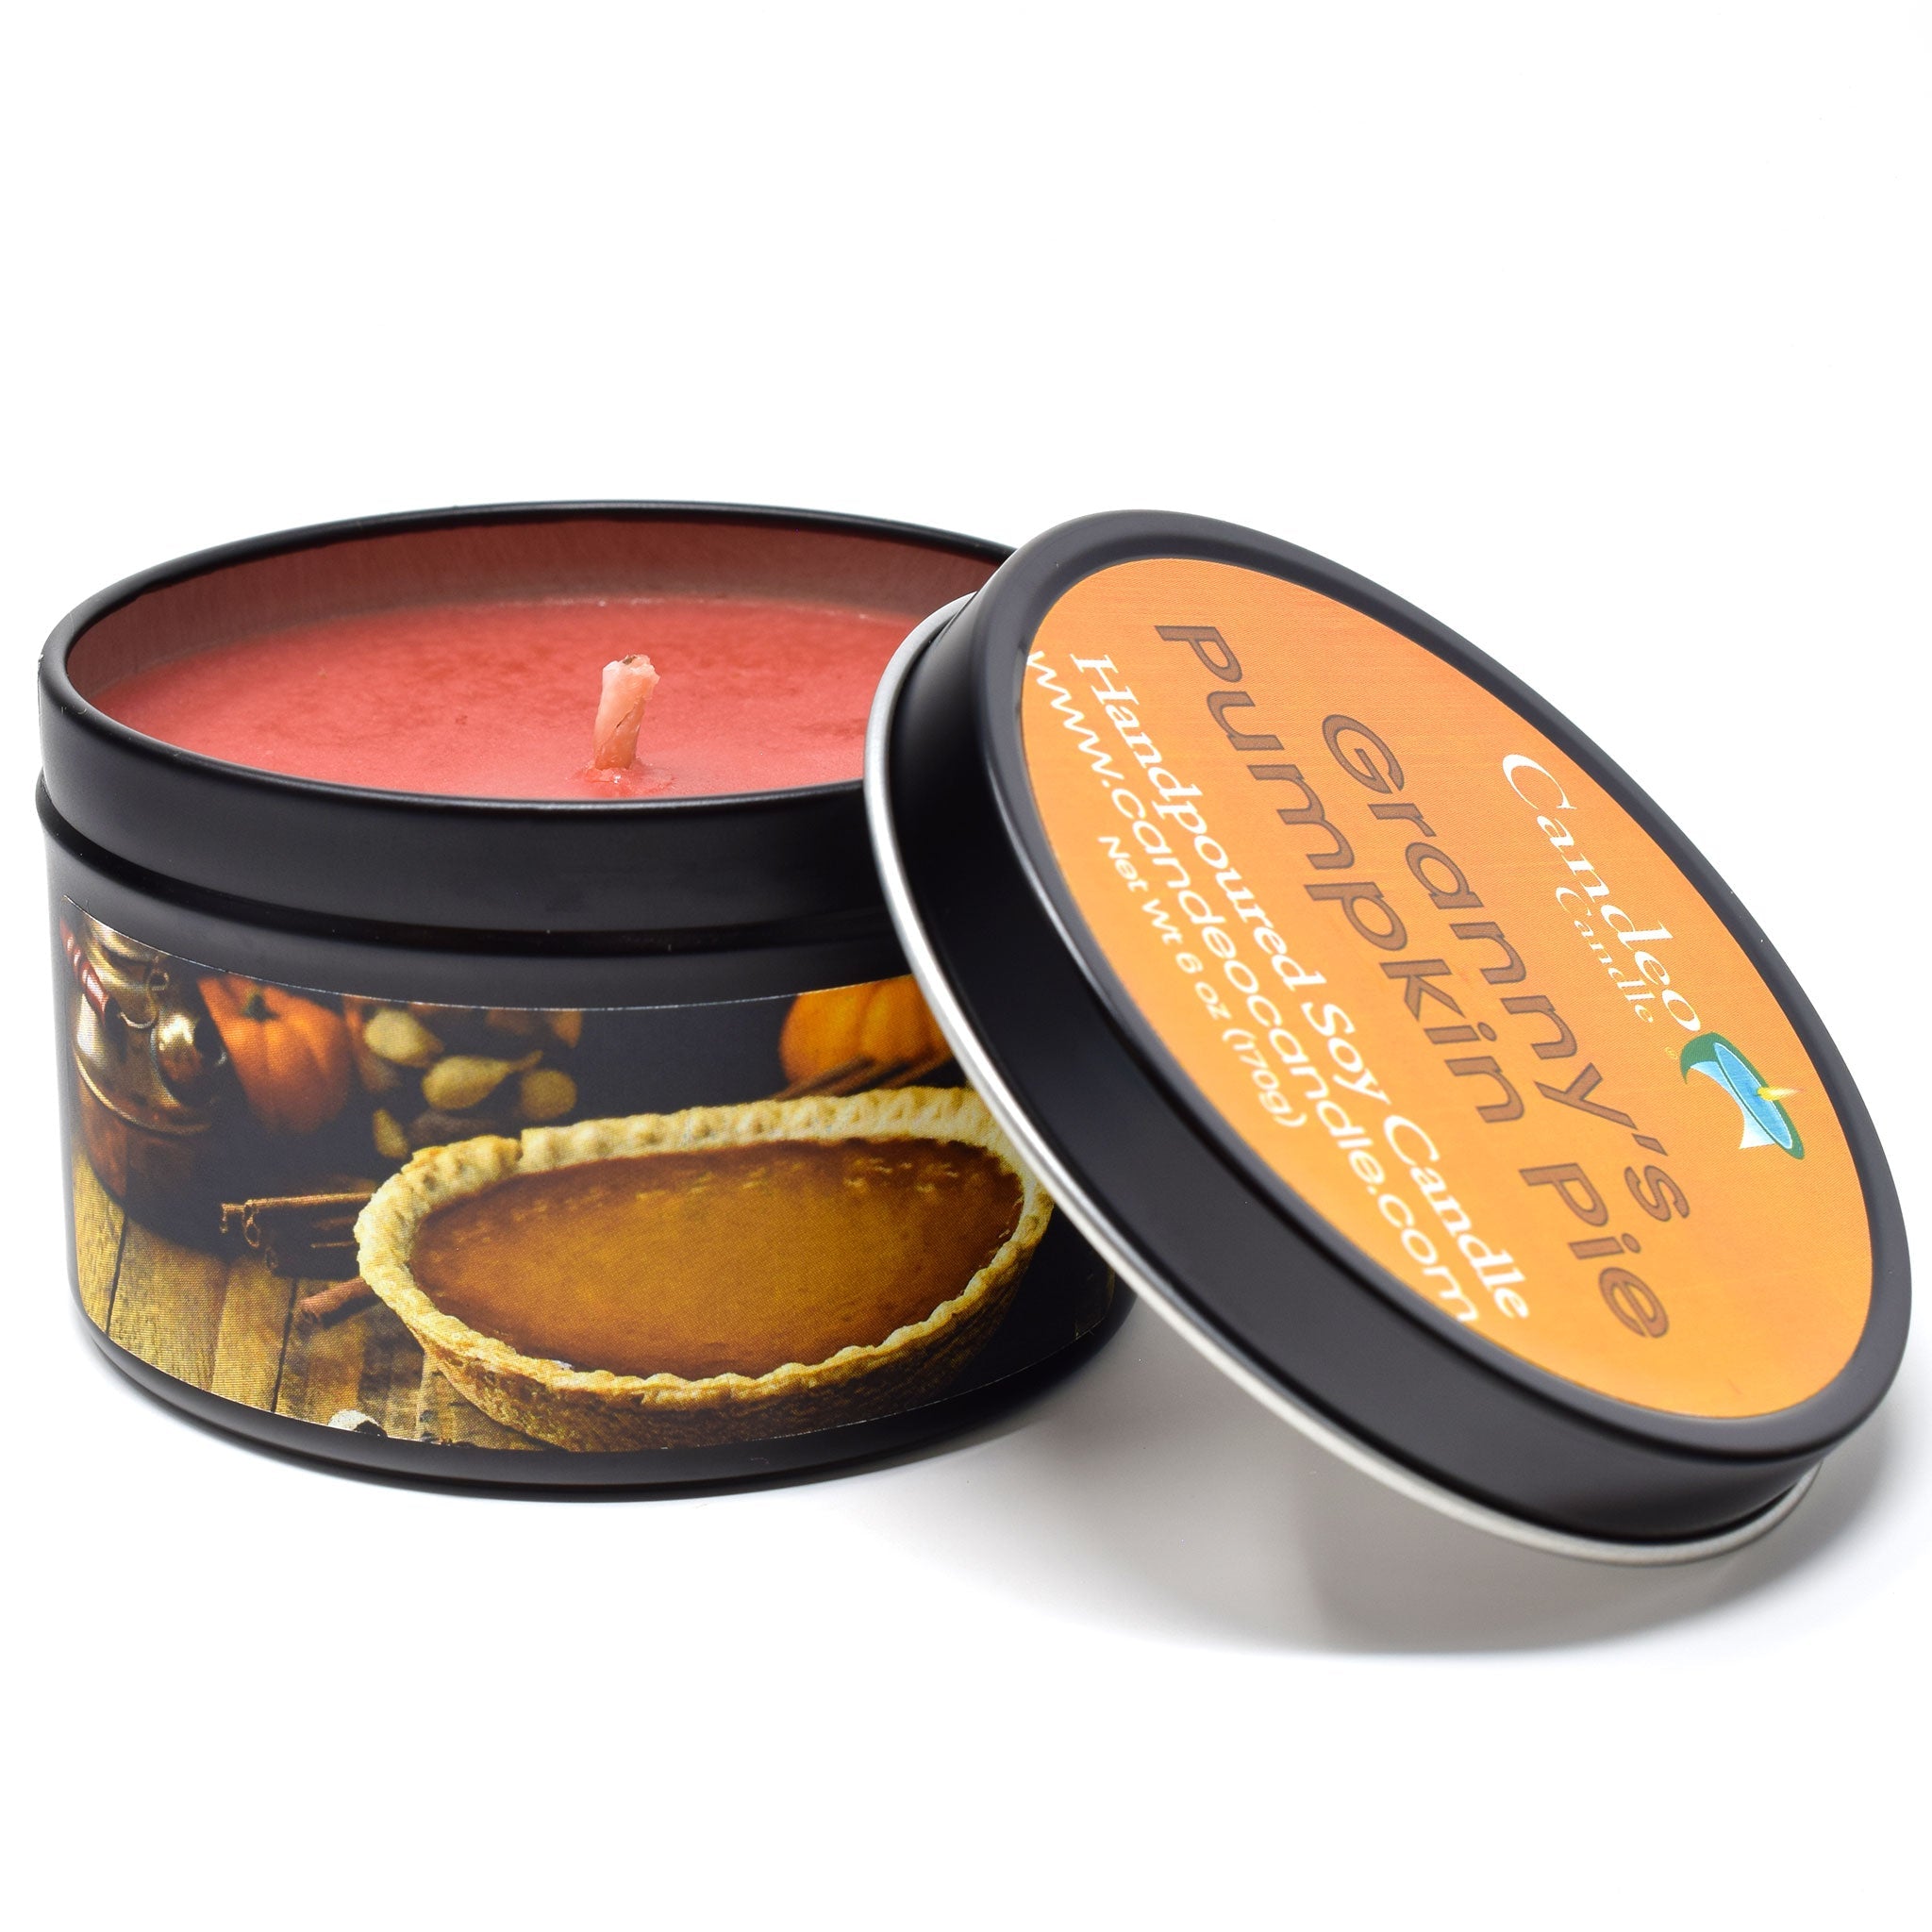 Granny's Pumpkin Pie, 6oz Soy Candle Tin - Candeo Candle